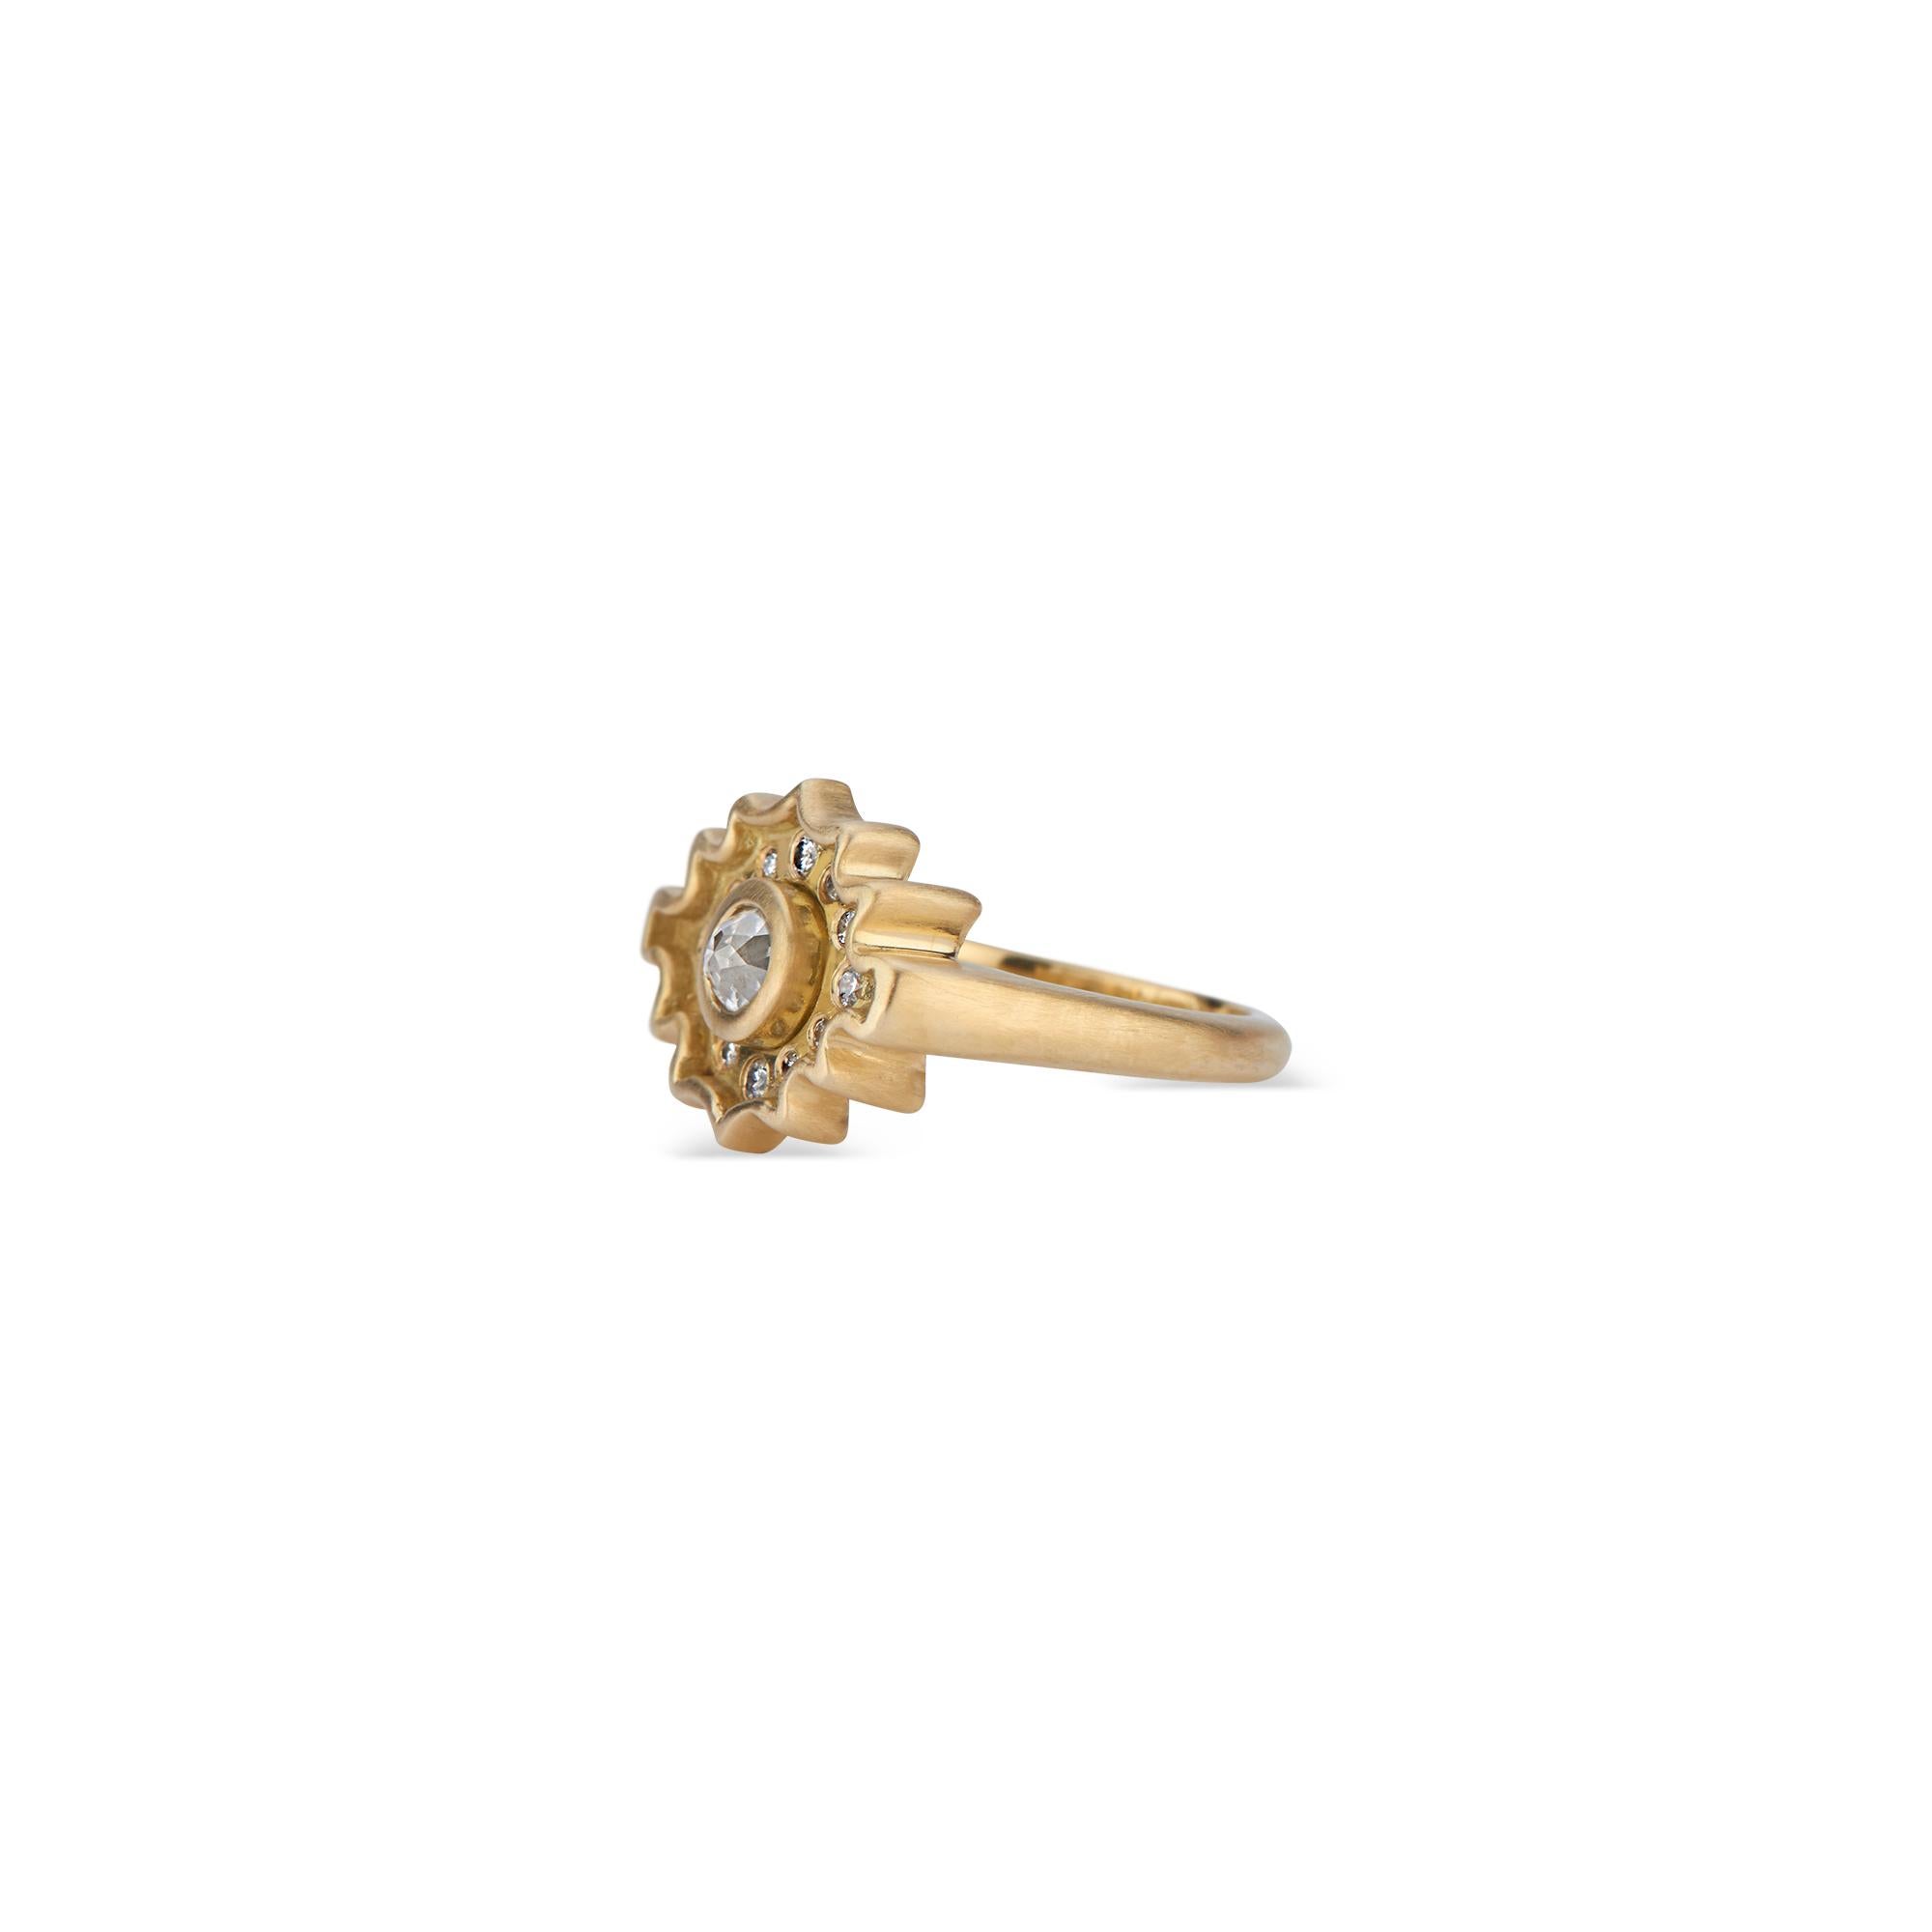 This exclusive design presents the diamond from a new perspective. The central salt and pepper rose cut diamond (approximately .31 carat total carat weight) of this 18k yellow gold ring is a departure from the ubiquitous brilliant cut diamond. The